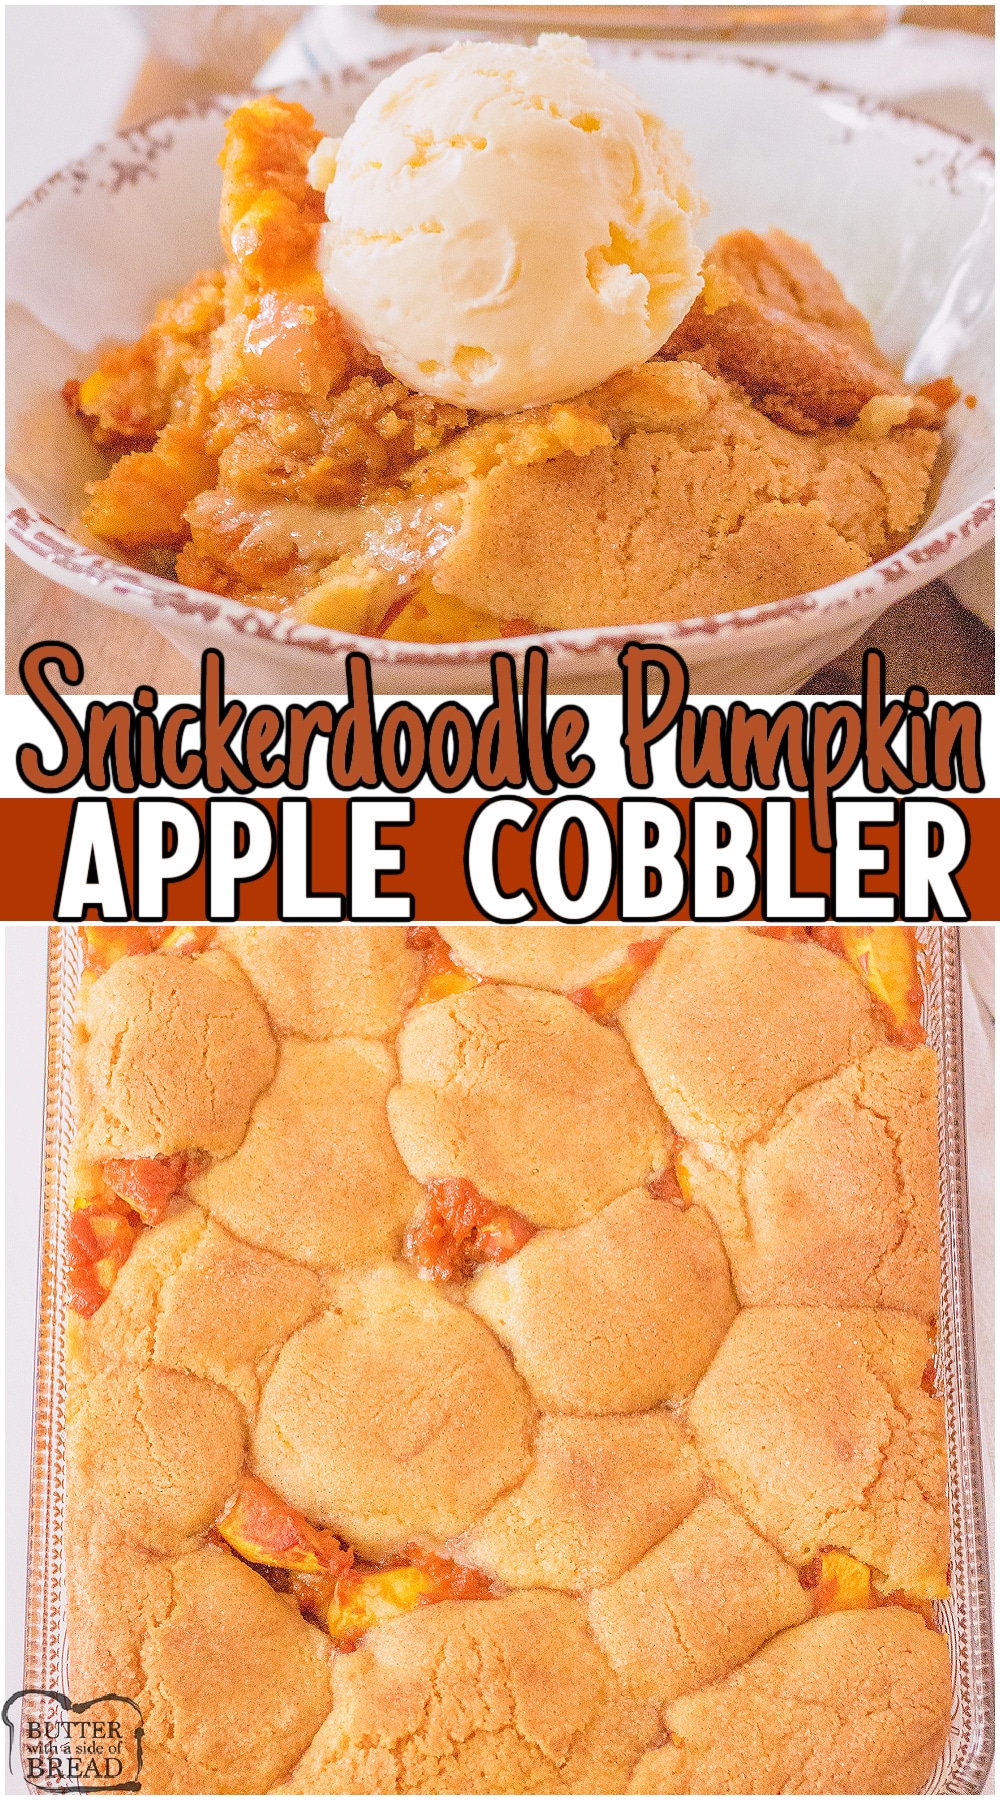 Snickerdoodle Pumpkin Apple Cobbler is a lovely blend of the BEST Fall flavors in one dessert! Sweet crisp apples covered with a pumpkin brown sugar mix & baked between layers of cinnamon cookie dough! This Fall cobbler is incredible topped with vanilla ice cream! #cobbler #apple #pumpkin #snickerdoodle #baking #dessert #easyrecipe from BUTTER WITH A SIDE OF BREAD